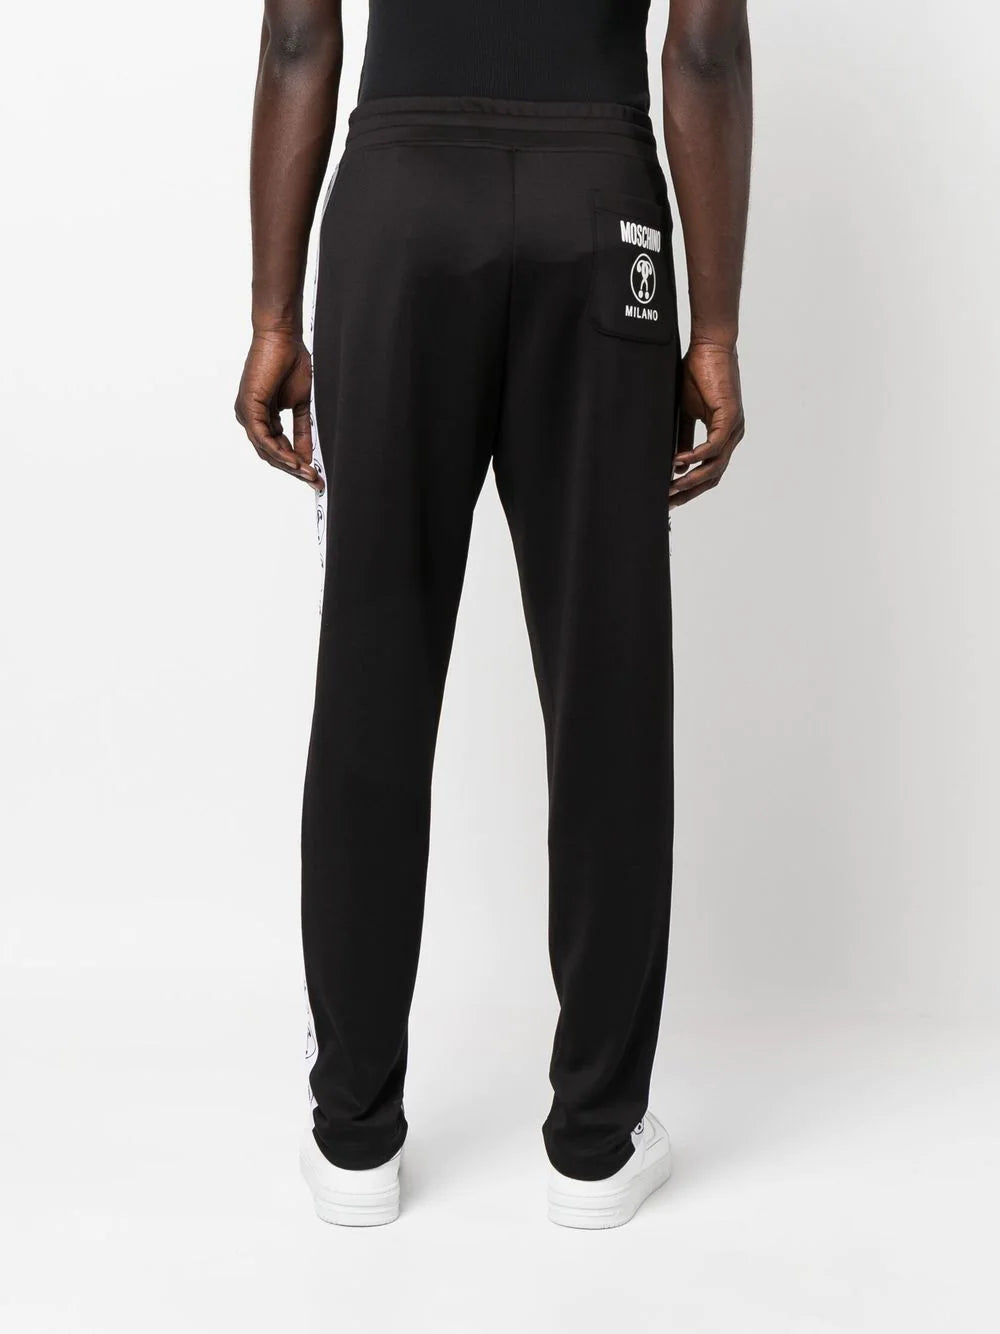 Moschino Black Double Question Mark Sweatpant